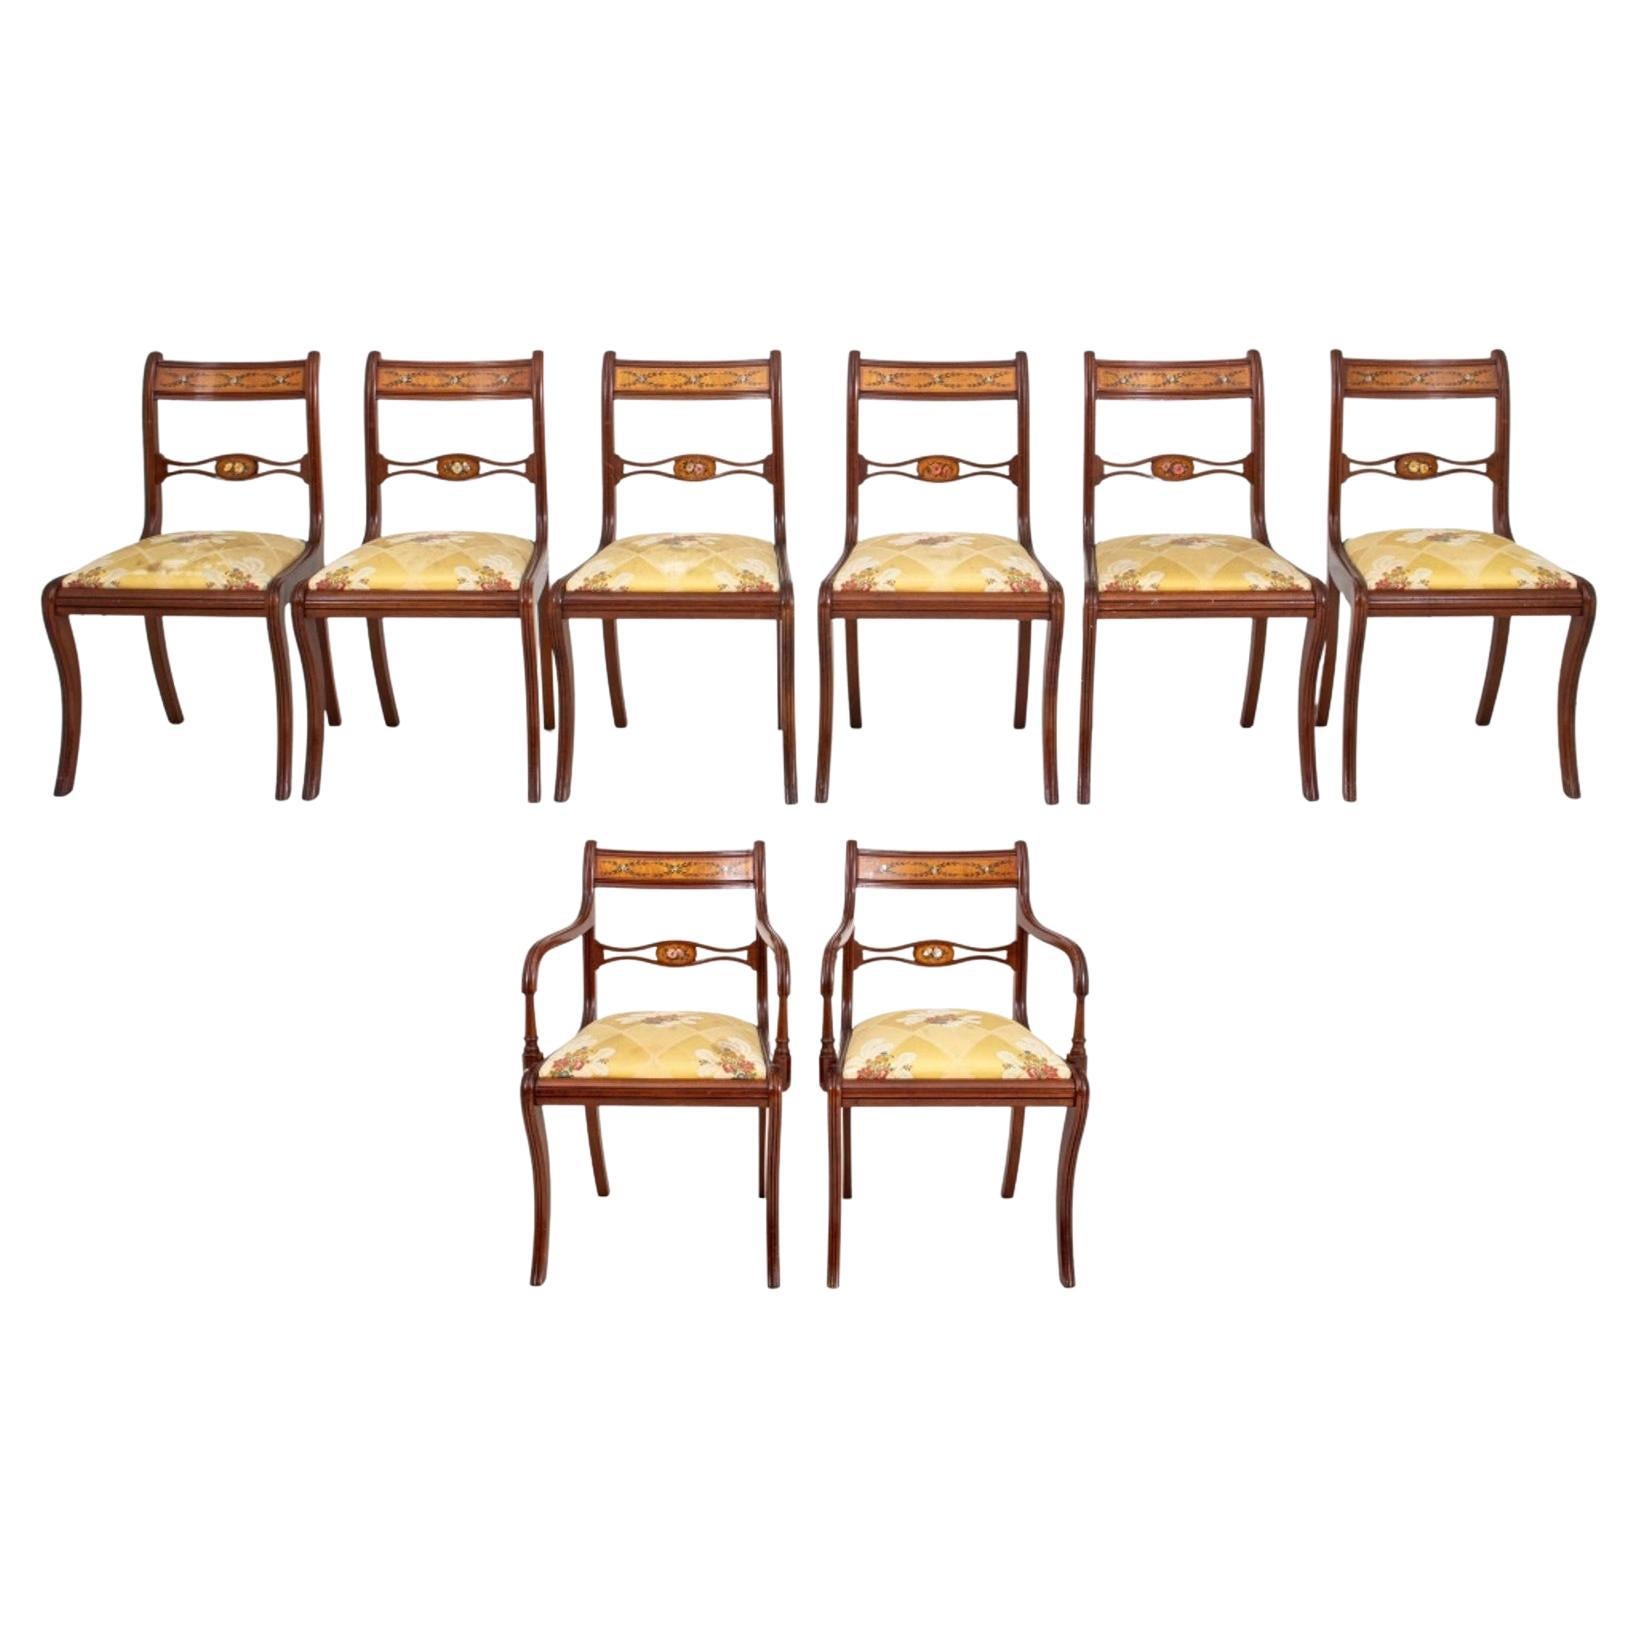 Sheraton Manner Painted Satinwood Dining Chairs, Set of Eight